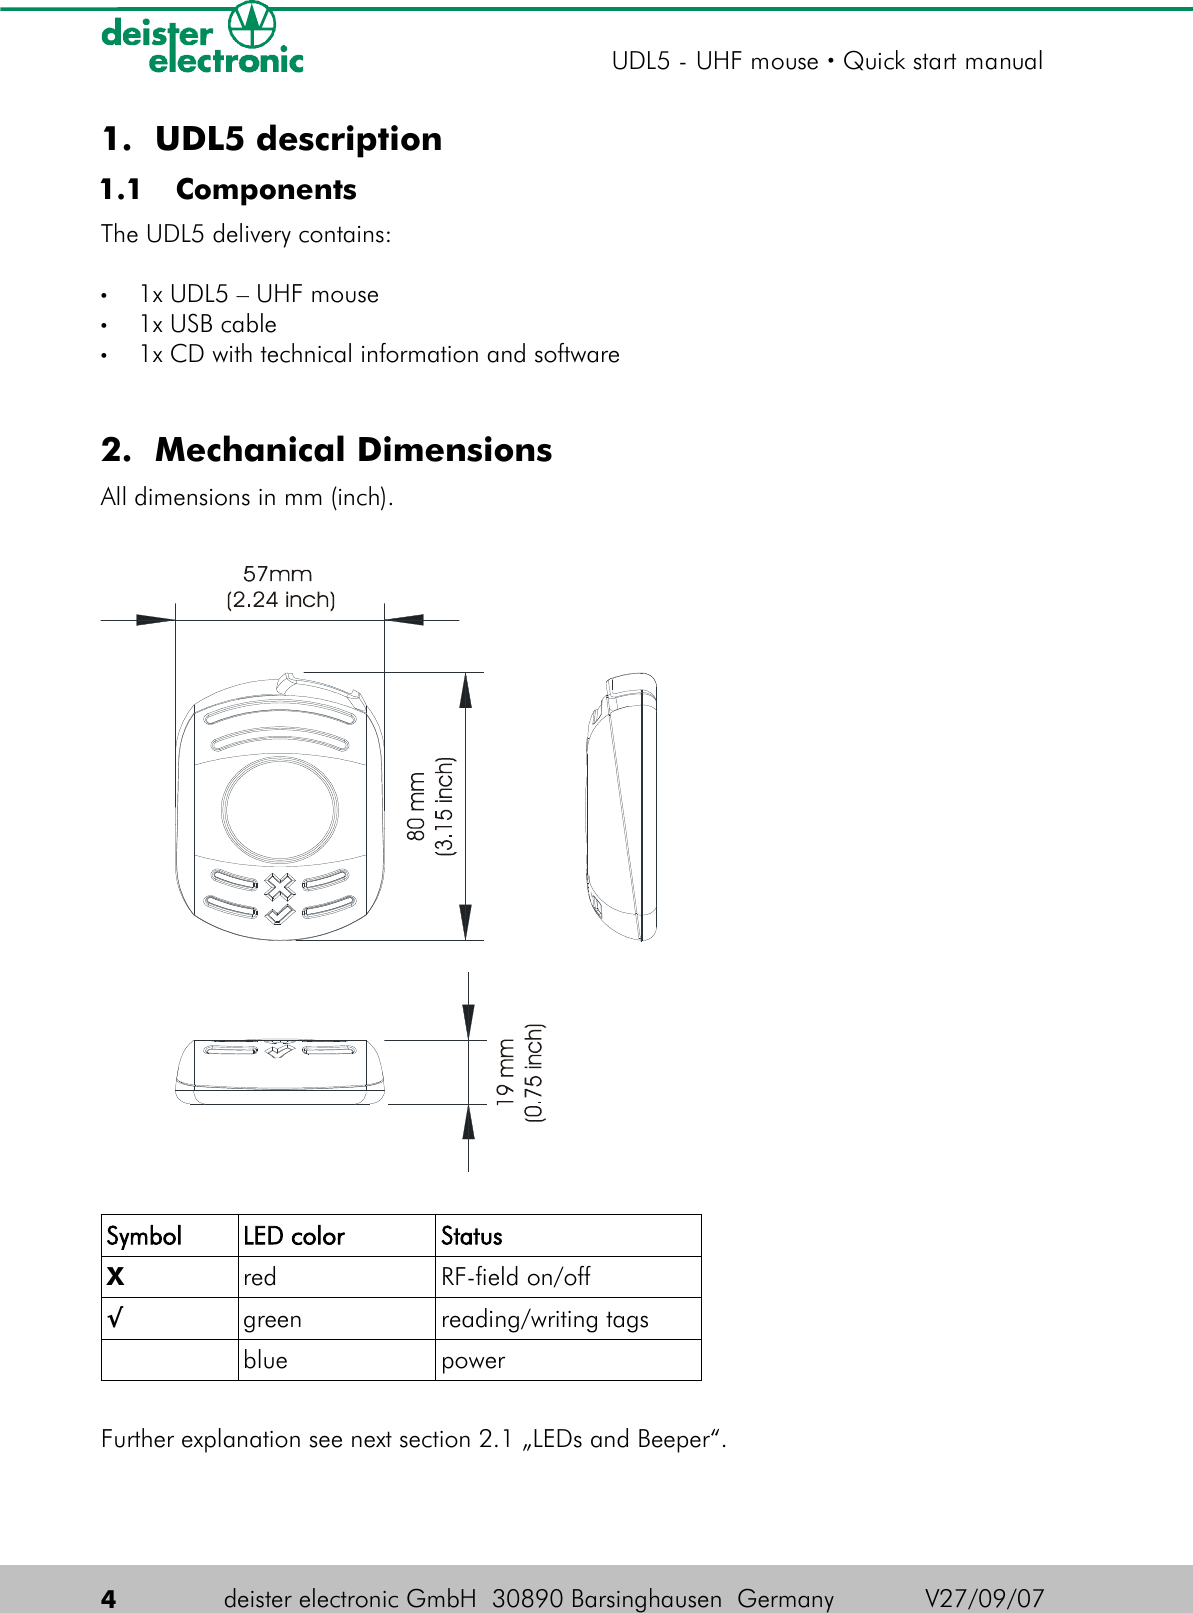 1. UDL5 description 1.1  ComponentsThe UDL5 delivery contains:•1x UDL5 – UHF mouse•1x USB cable•1x CD with technical information and software2. Mechanical DimensionsAll dimensions in mm (inch).Symbol LED color StatusXred RF-field on/off√green reading/writing tagsblue powerFurther explanation see next section 2.1 „LEDs and Beeper“.4deister electronic GmbH  30890 Barsinghausen  Germany  V27/09/07UDL5 - UHF mouse · Quick start manual